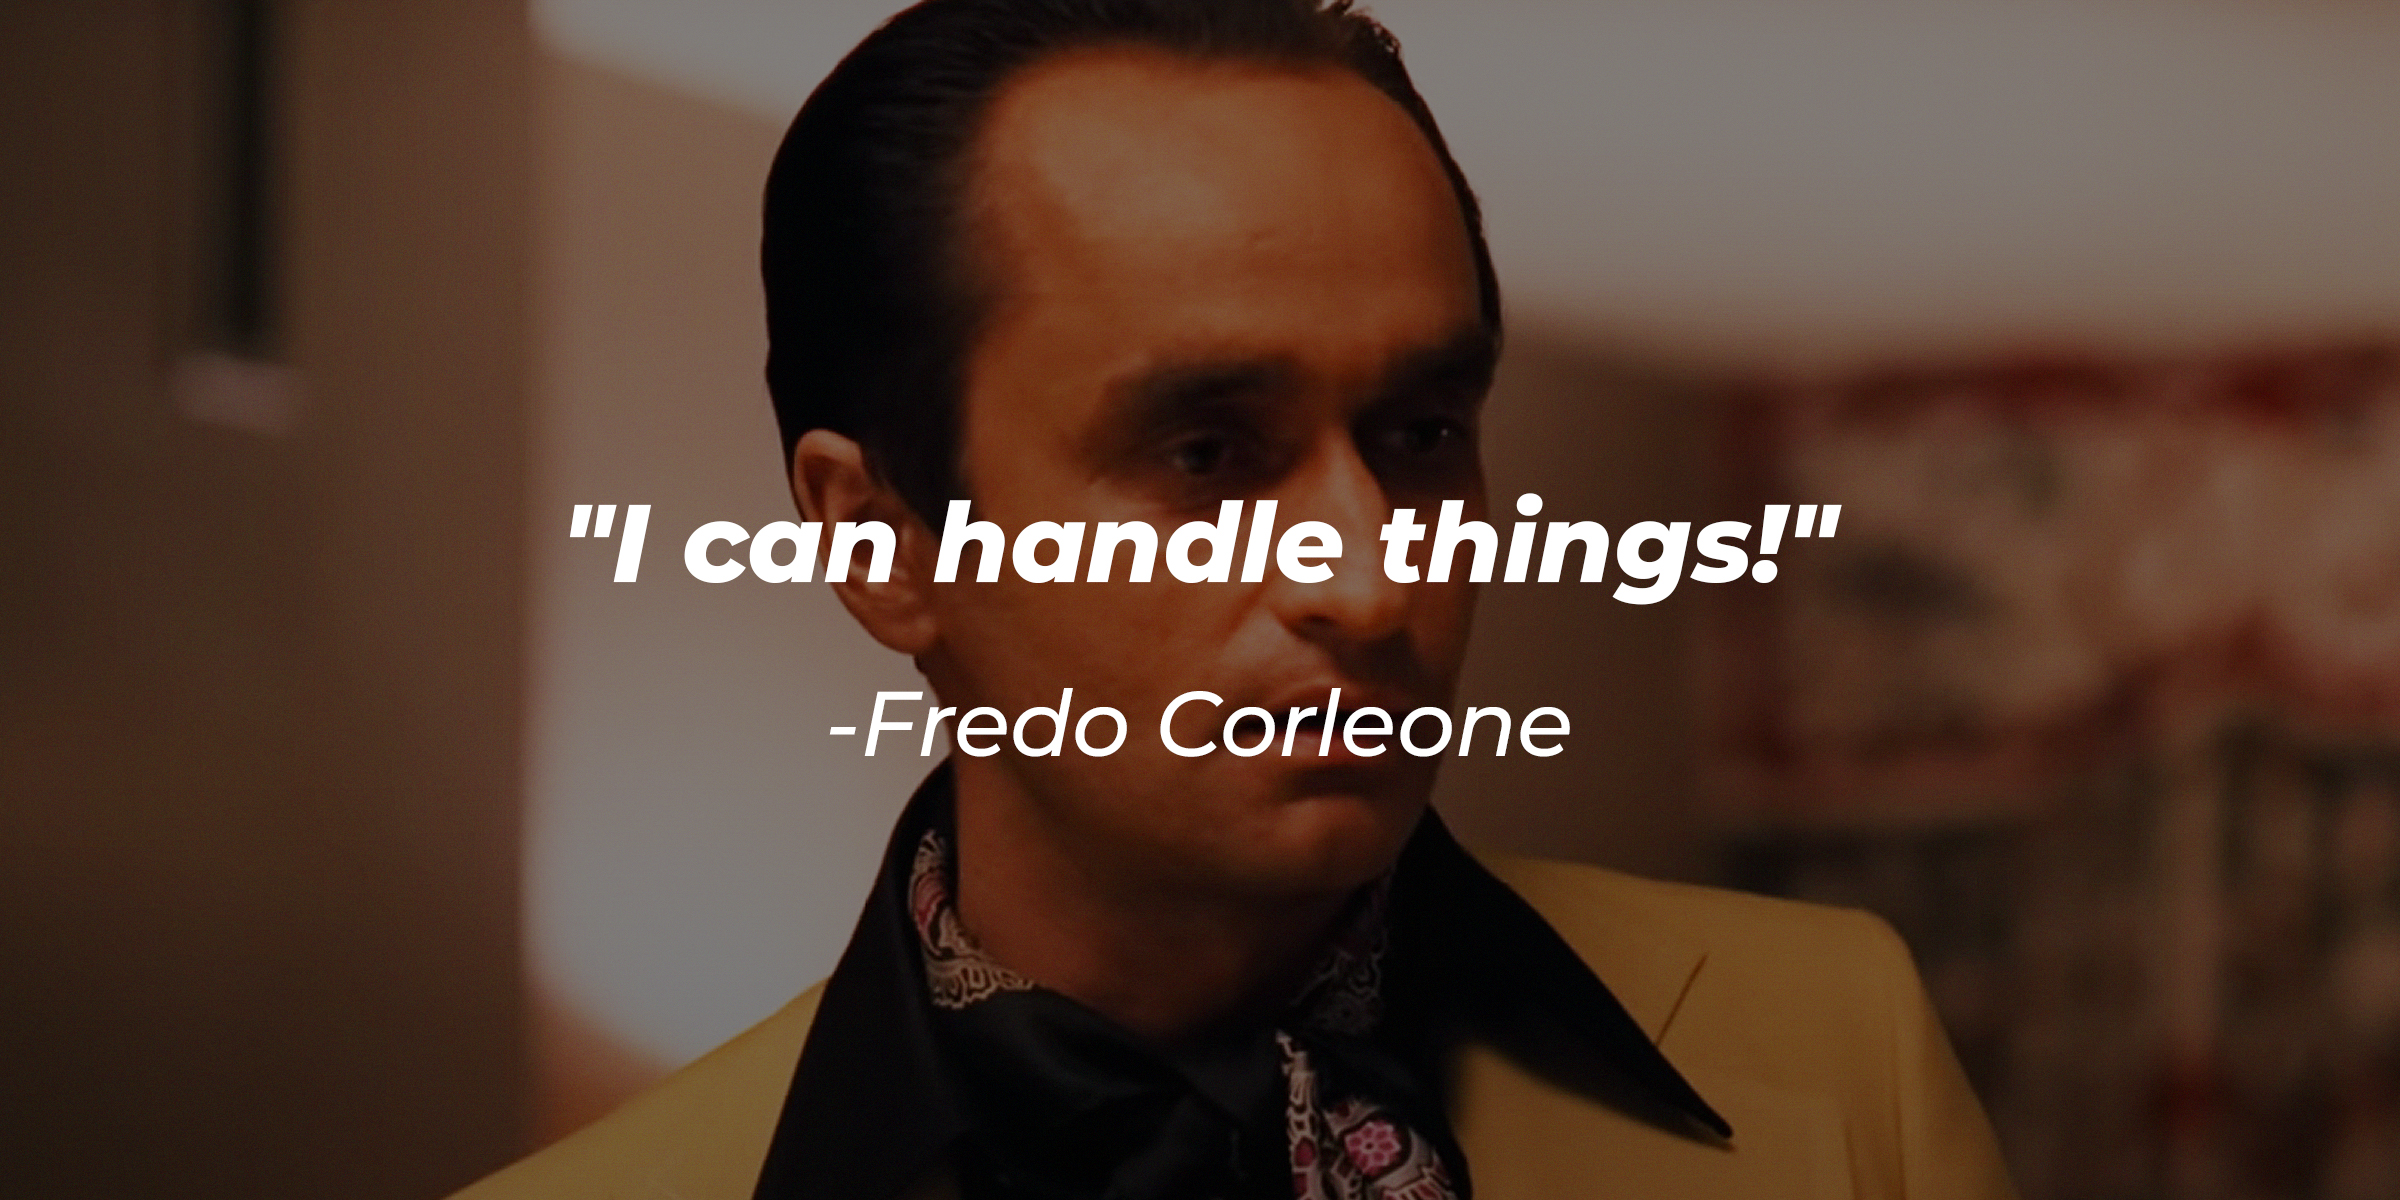 Fredo Corleone’s quote: "I can handle things!" | Source: Facebook/thegodfather